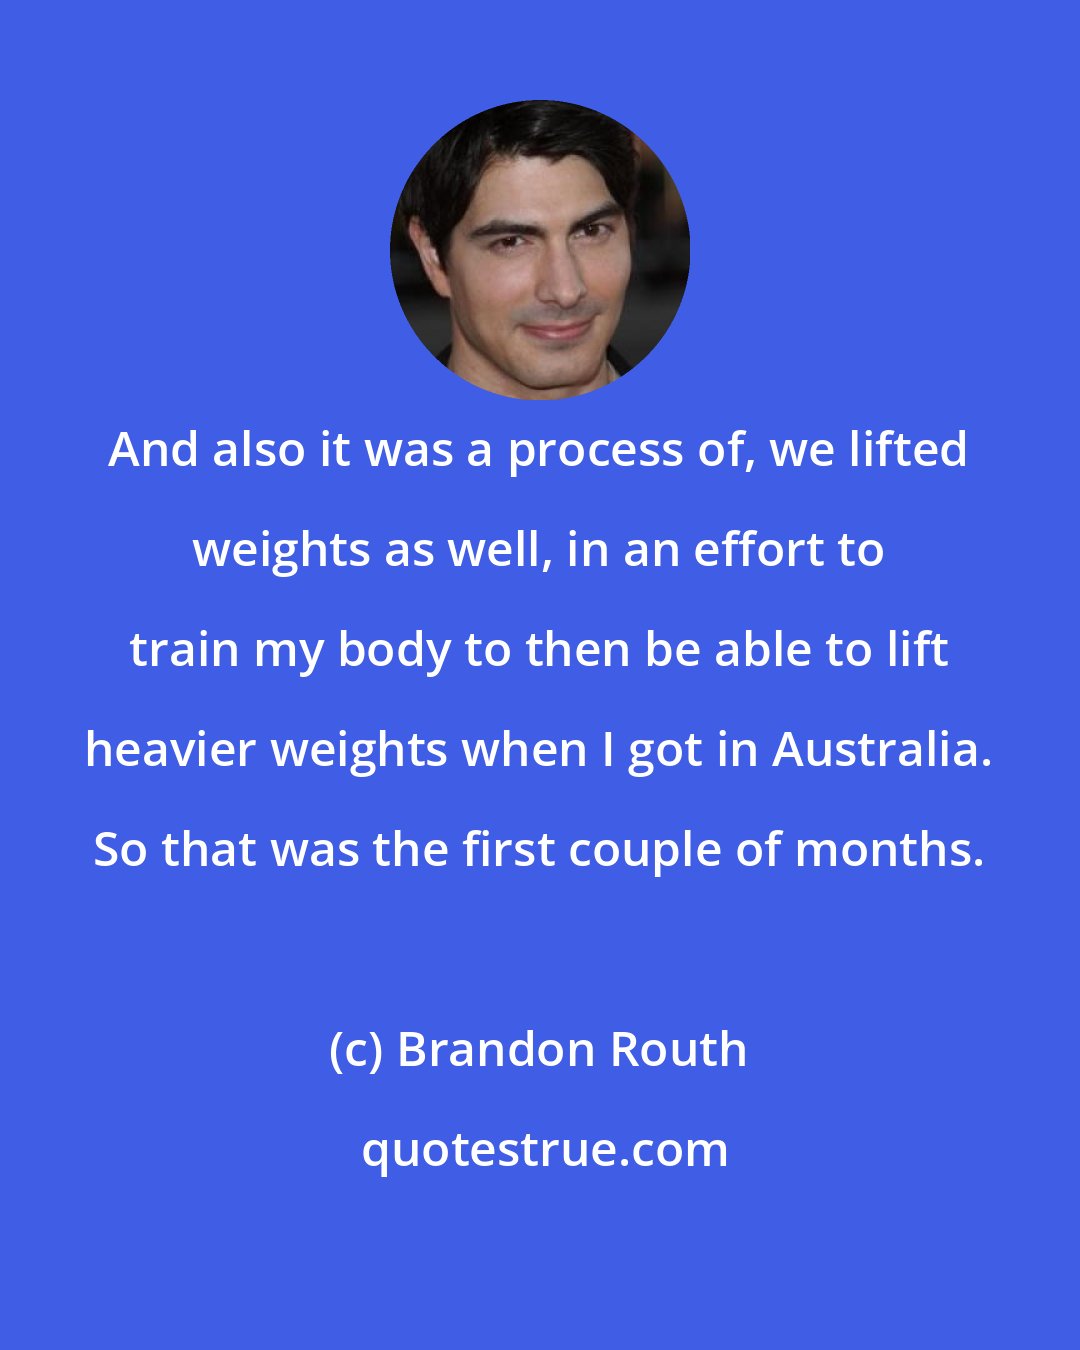 Brandon Routh: And also it was a process of, we lifted weights as well, in an effort to train my body to then be able to lift heavier weights when I got in Australia. So that was the first couple of months.